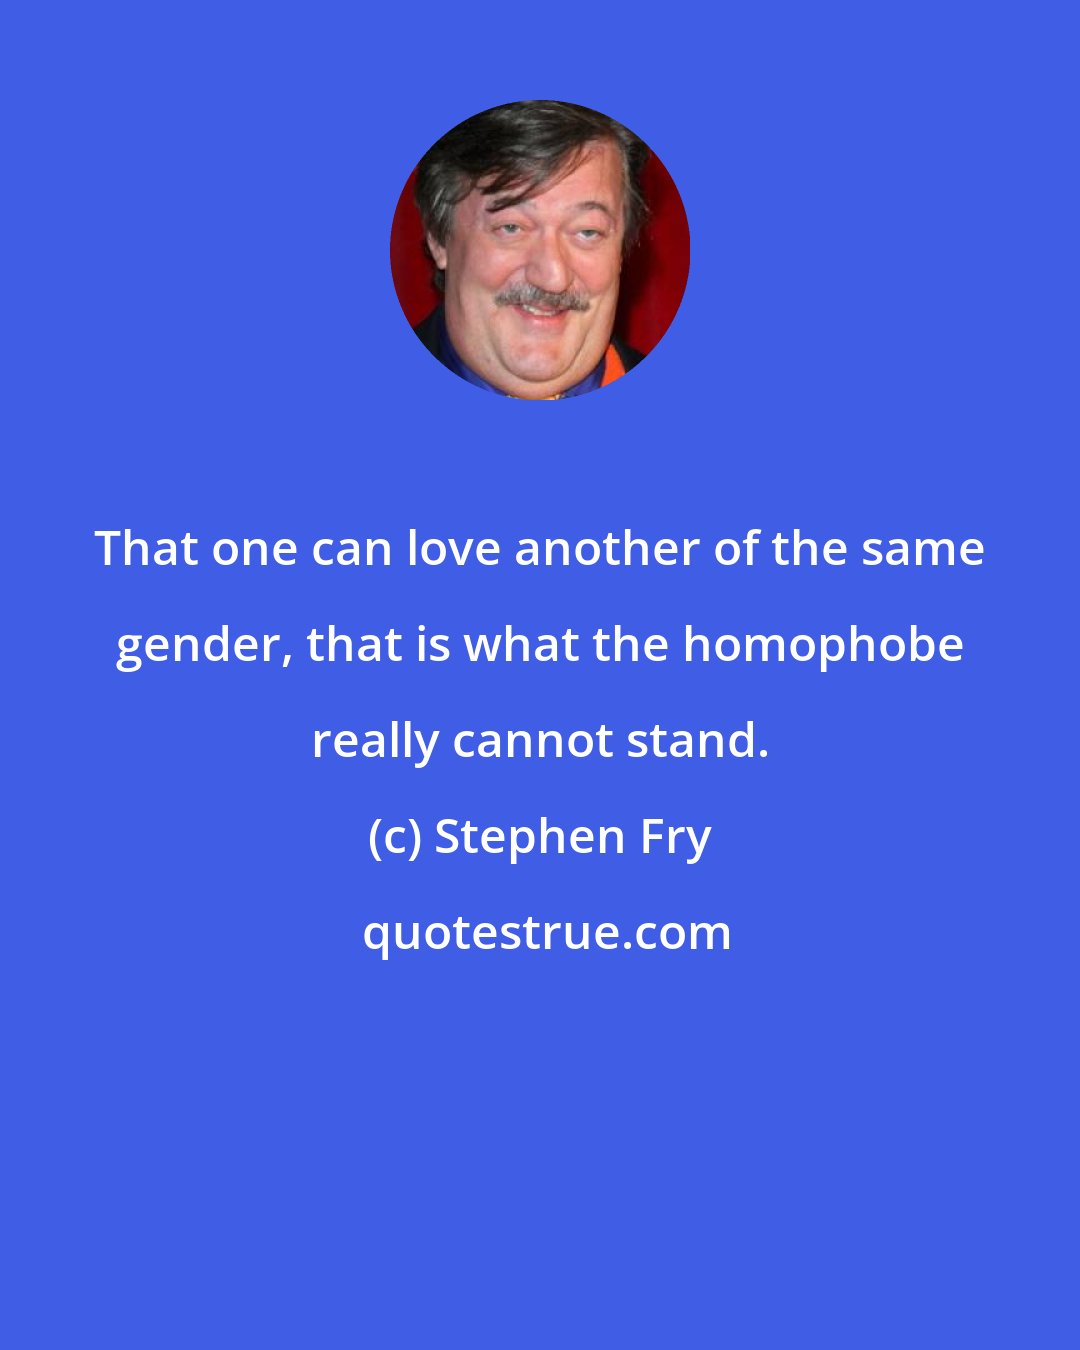 Stephen Fry: That one can love another of the same gender, that is what the homophobe really cannot stand.